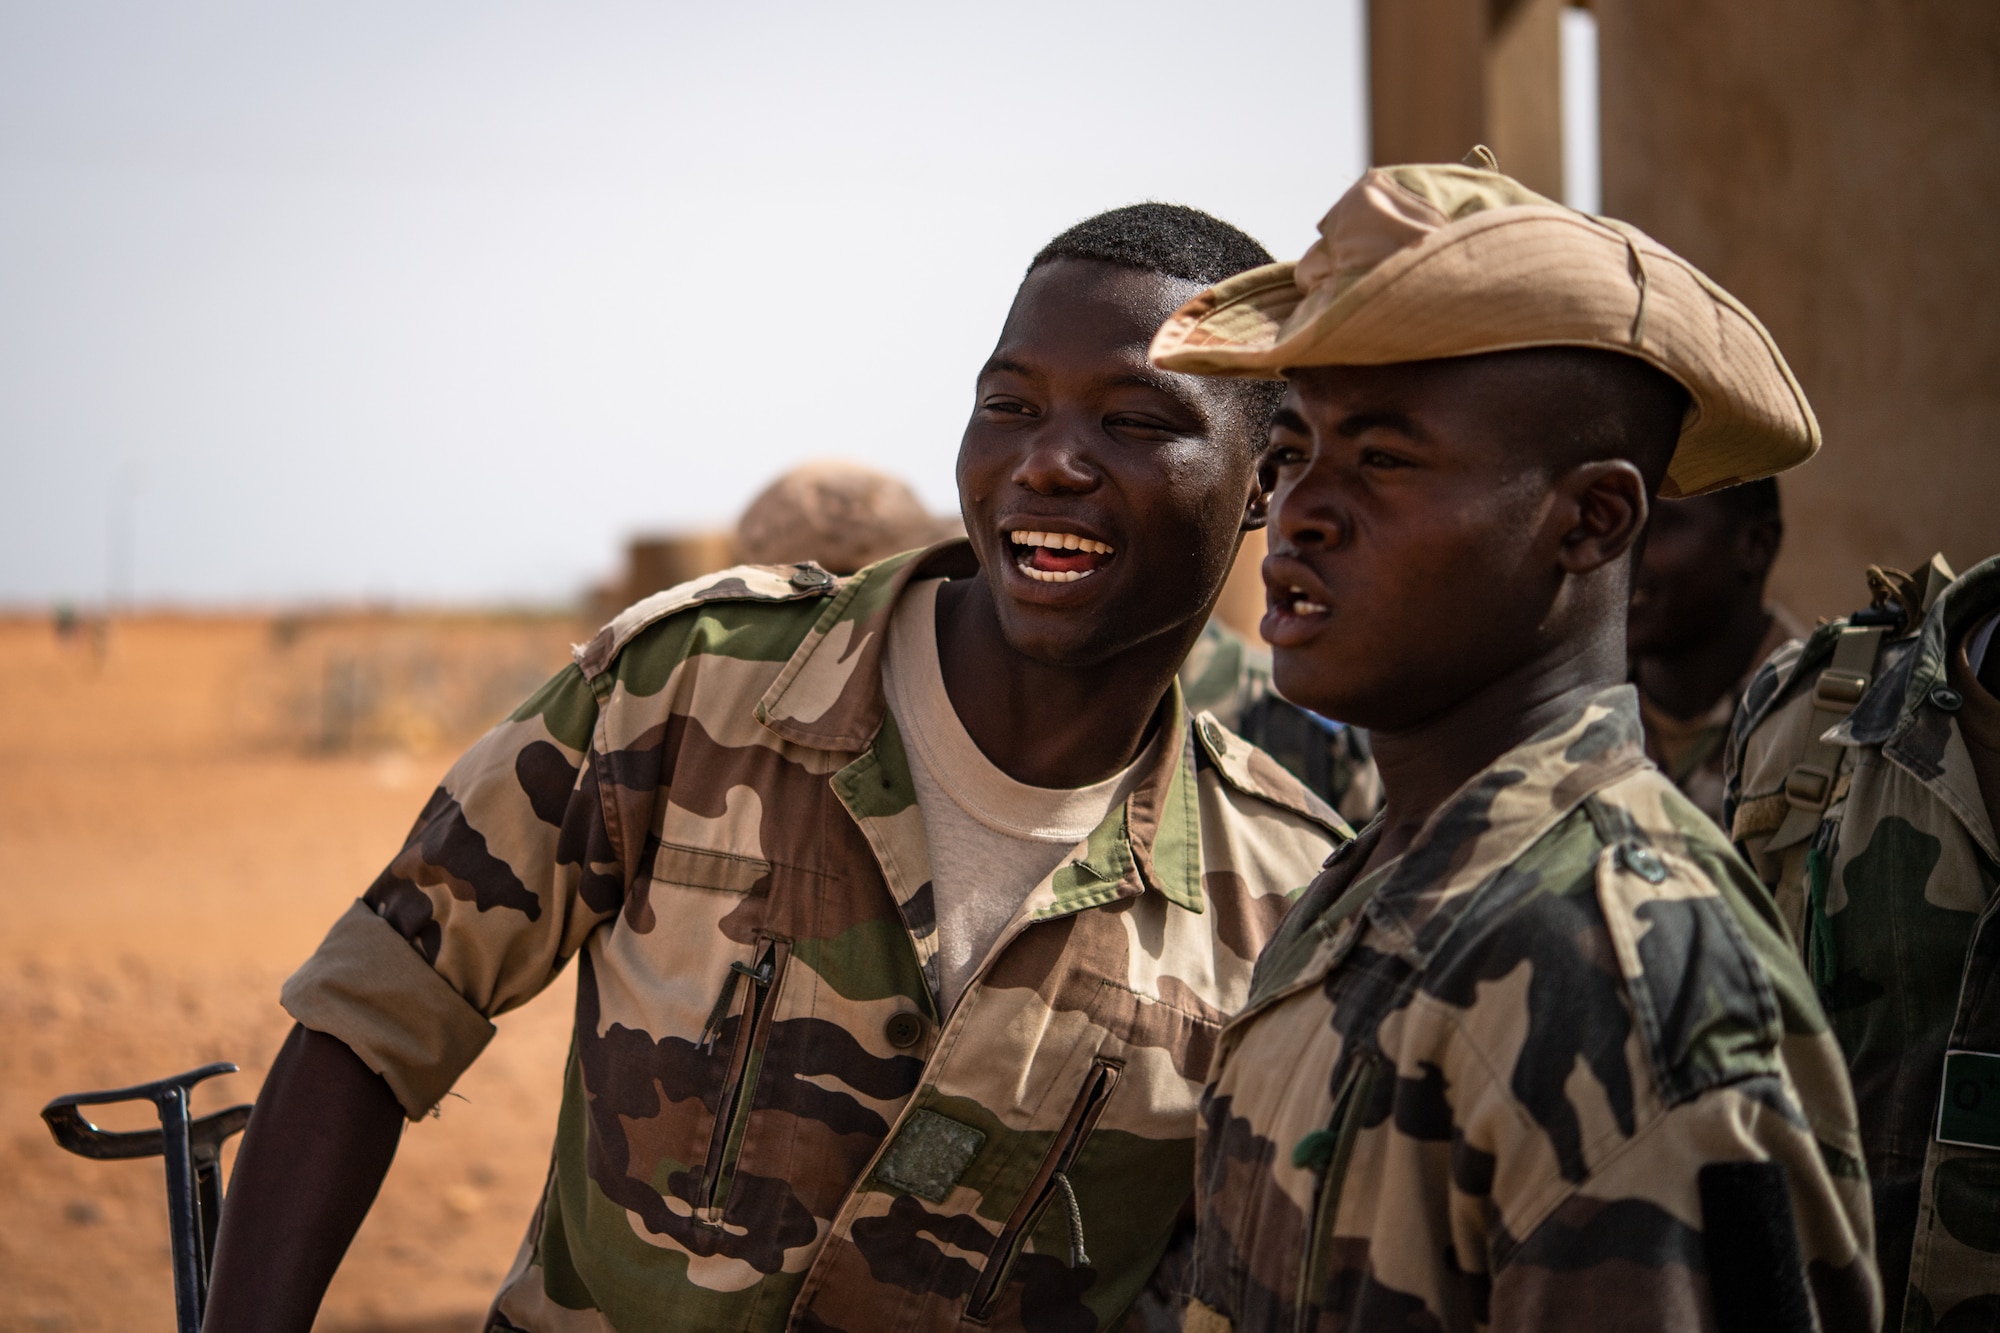 Niger Armed Forces (French language: Forces Armées Nigeriennes) members sing and dance while on break during a training exercise with the 409th Expeditionary Security Forces Squadron air advisors at the FAN compound on Nigerien Air Base 201 in Agadez, Niger, July 10, 2019. The FAN sing and dance every training day to keep their morale high. (U.S. Air Force photo by Staff Sgt. Devin Boyer)